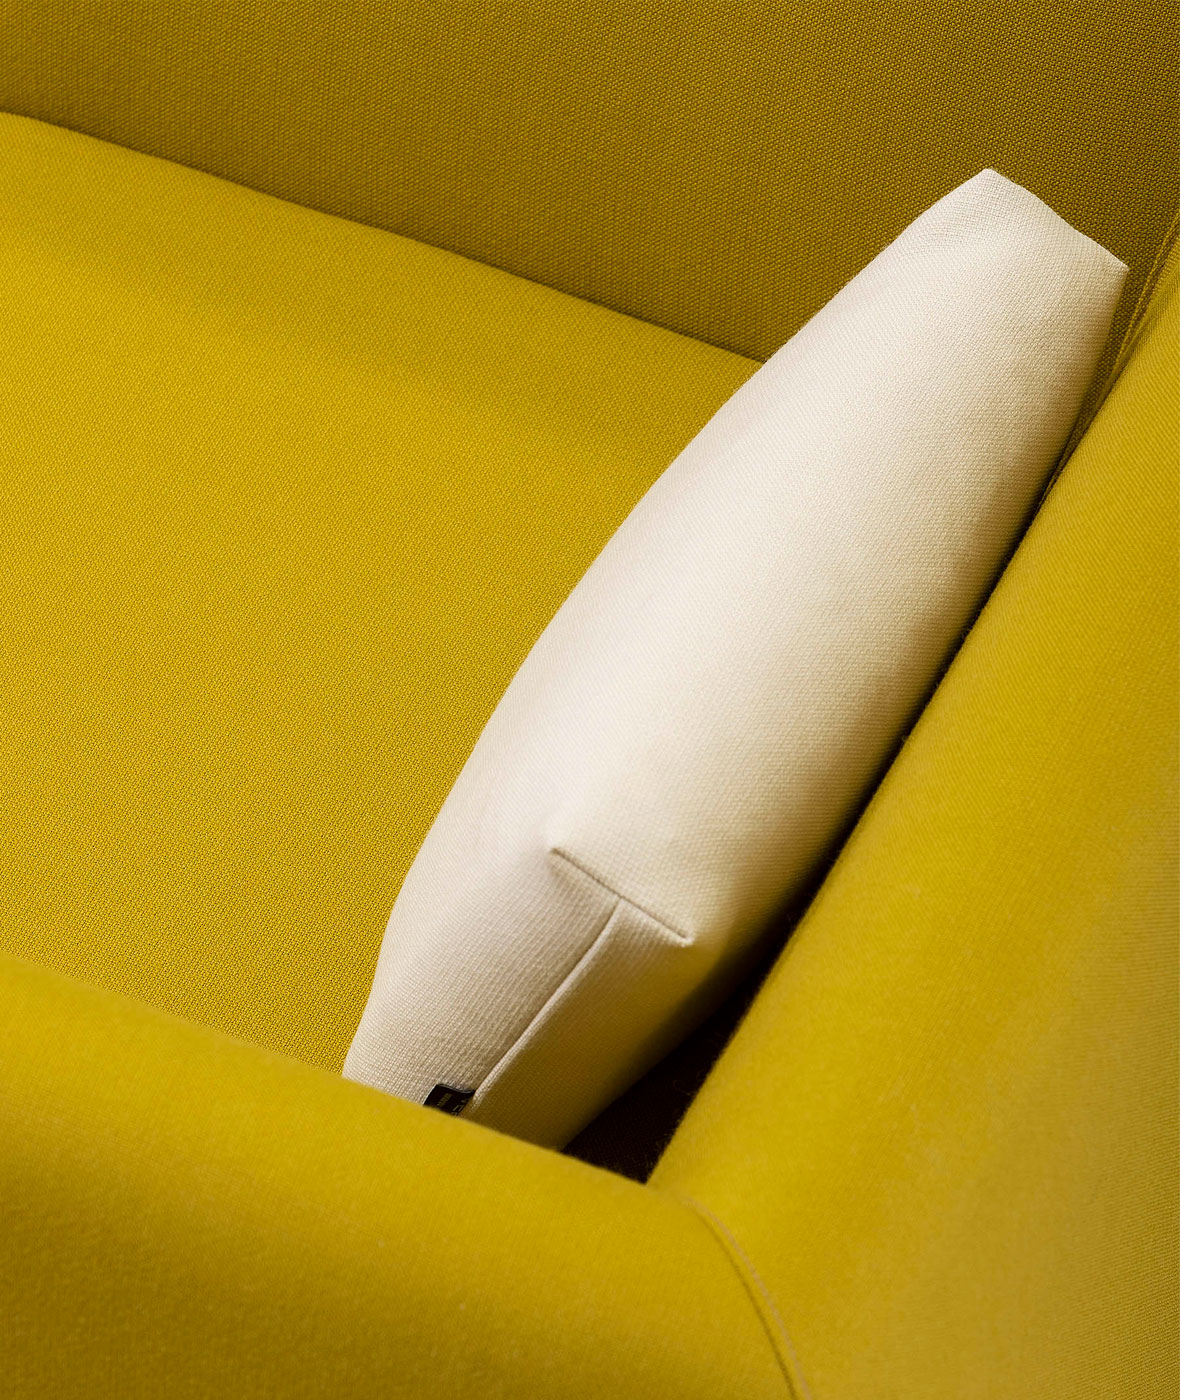 Dula armchair with upholstered armrests - Vergés